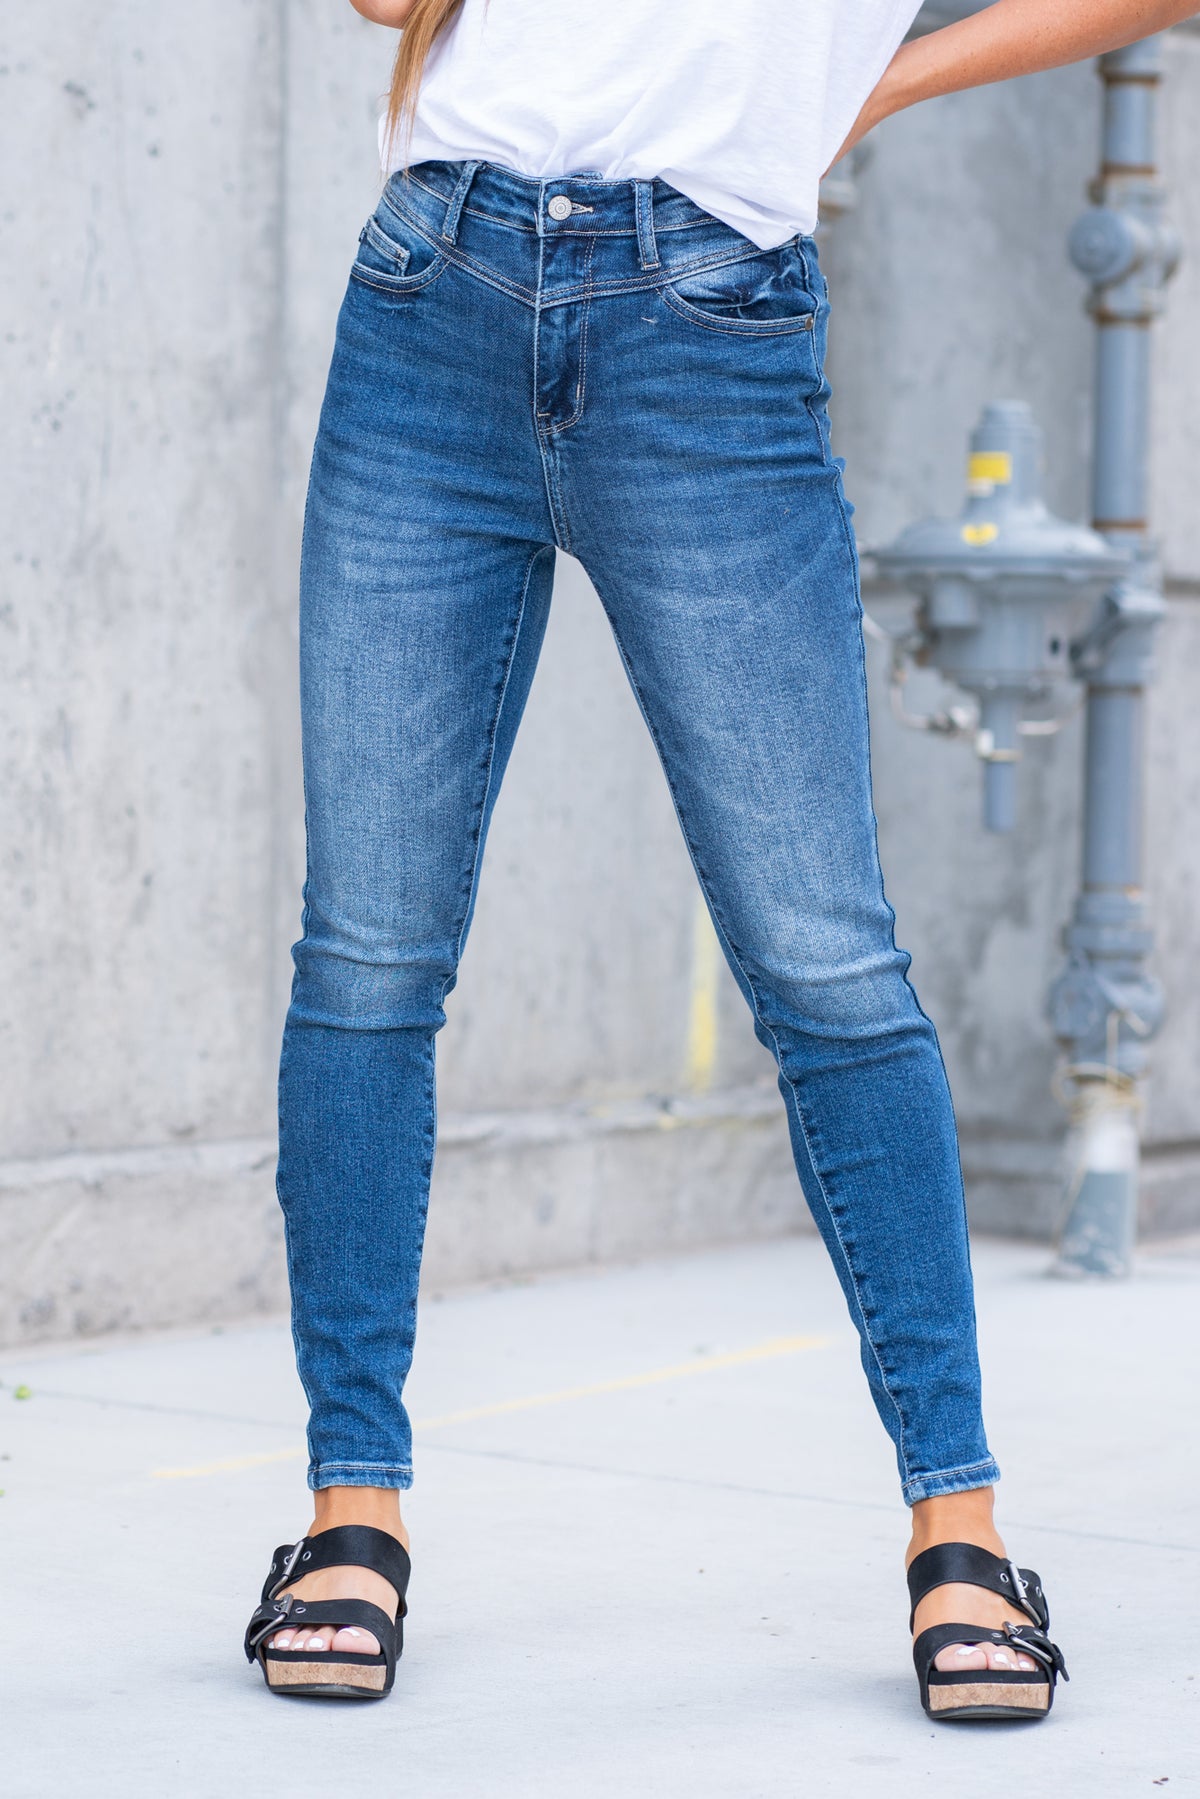 Judy Blue  Don't be afraid to wear high-waisted jeans, especially this western yoke fit. With a dark blue wash, these will be new favorites!   Color: Dark Blue Cut: Skinny, 28.5" Inseam* Rise: High Rise, 11" Front Rise* Material: 94% Cotton / 5% Polyester / 1% Spandex Machine Wash Separately In Cold Water Stitching: Classic Fly: Zipper Style #: JB 88364 -PL , 88364-PL Contact us for any additional measurements or sizing.  *Measured on the smallest size, measurements may vary by size.